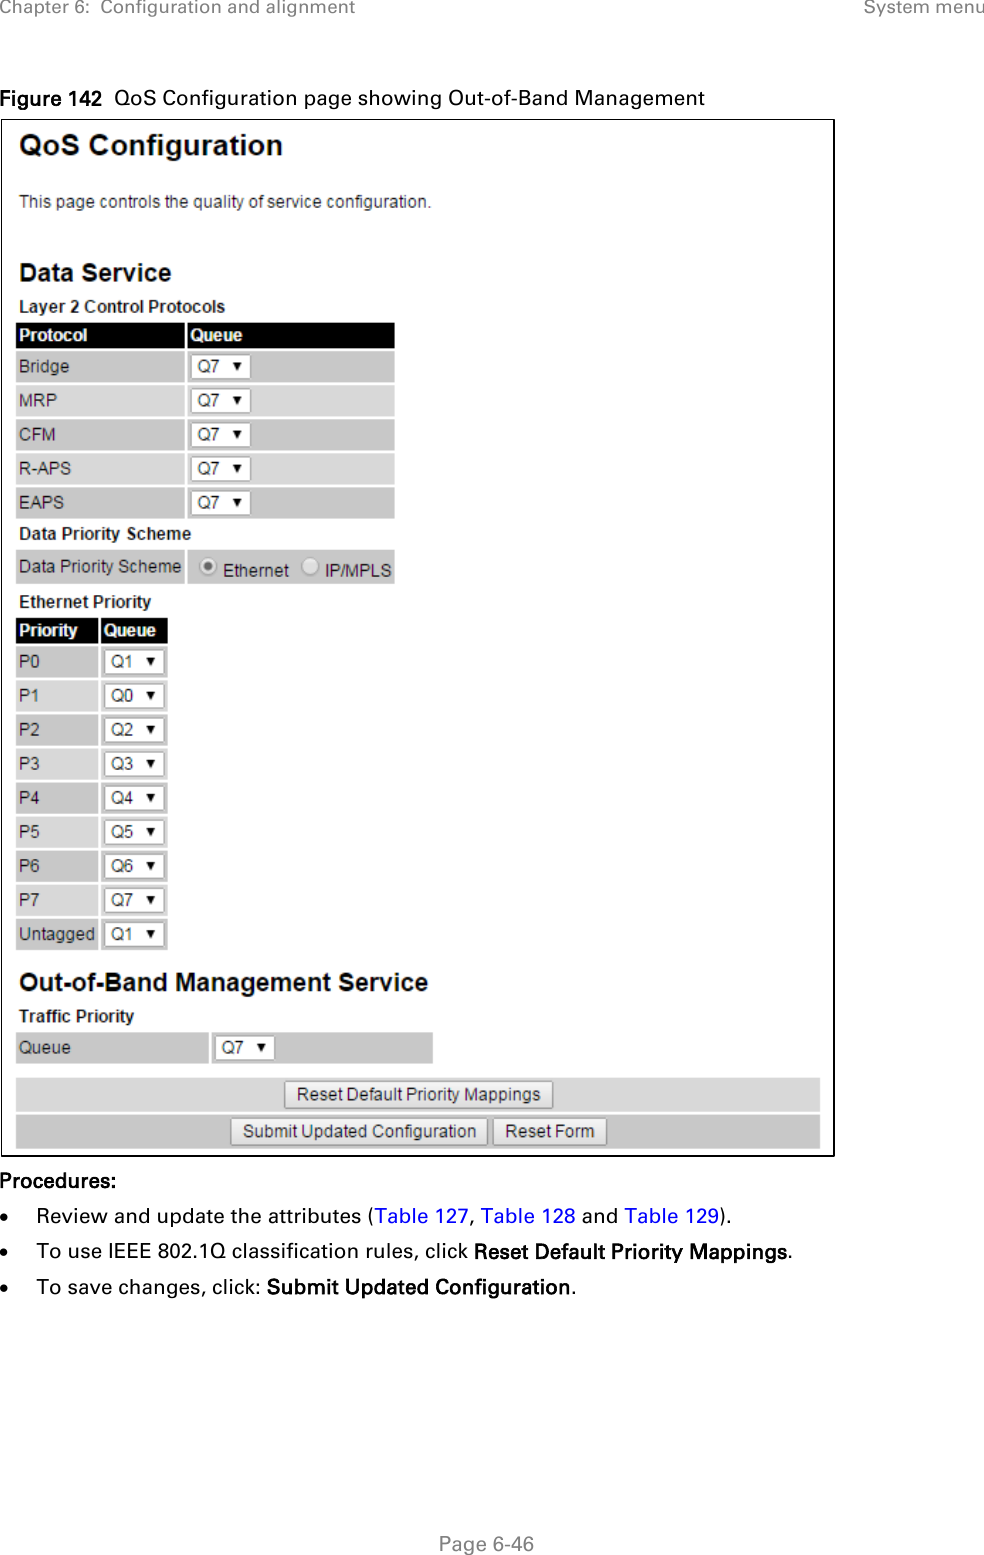 Chapter 6:  Configuration and alignment System menu  Figure 142  QoS Configuration page showing Out-of-Band Management   Procedures: • Review and update the attributes (Table 127, Table 128 and Table 129). • To use IEEE 802.1Q classification rules, click Reset Default Priority Mappings. • To save changes, click: Submit Updated Configuration.  Page 6-46 